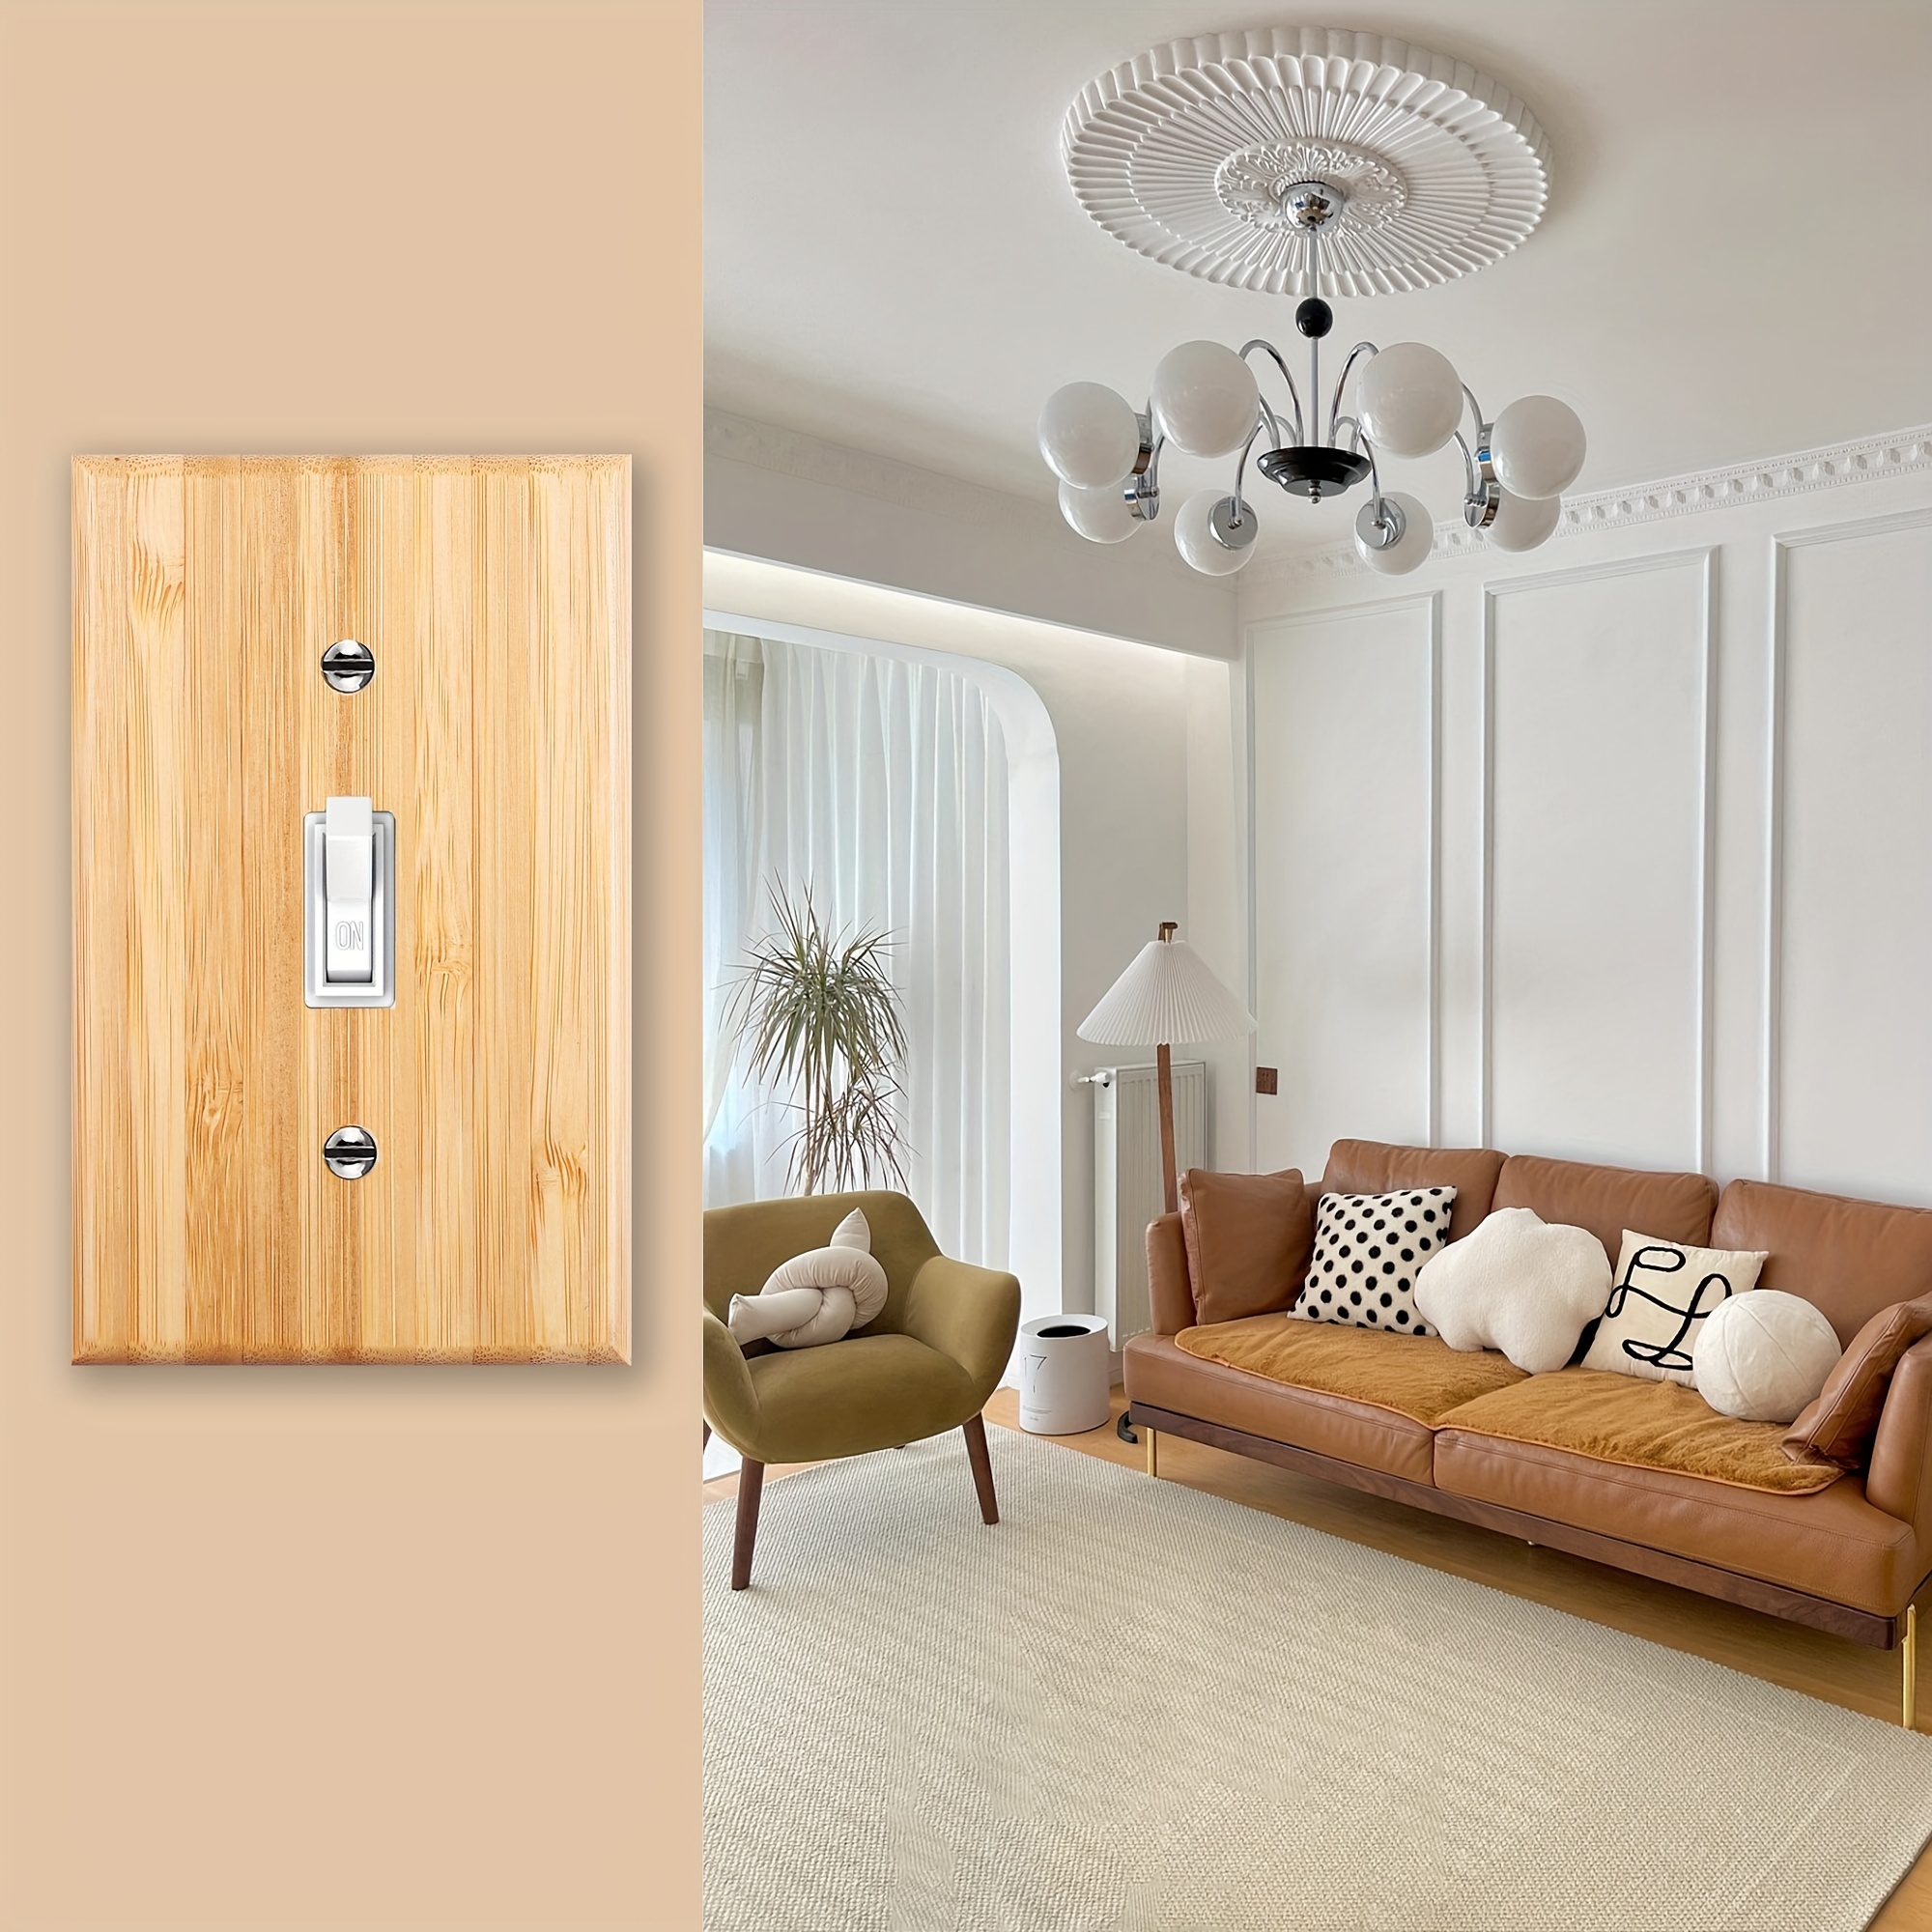 Printed Electrical Double Outlet with matching Wall Plate - Fish